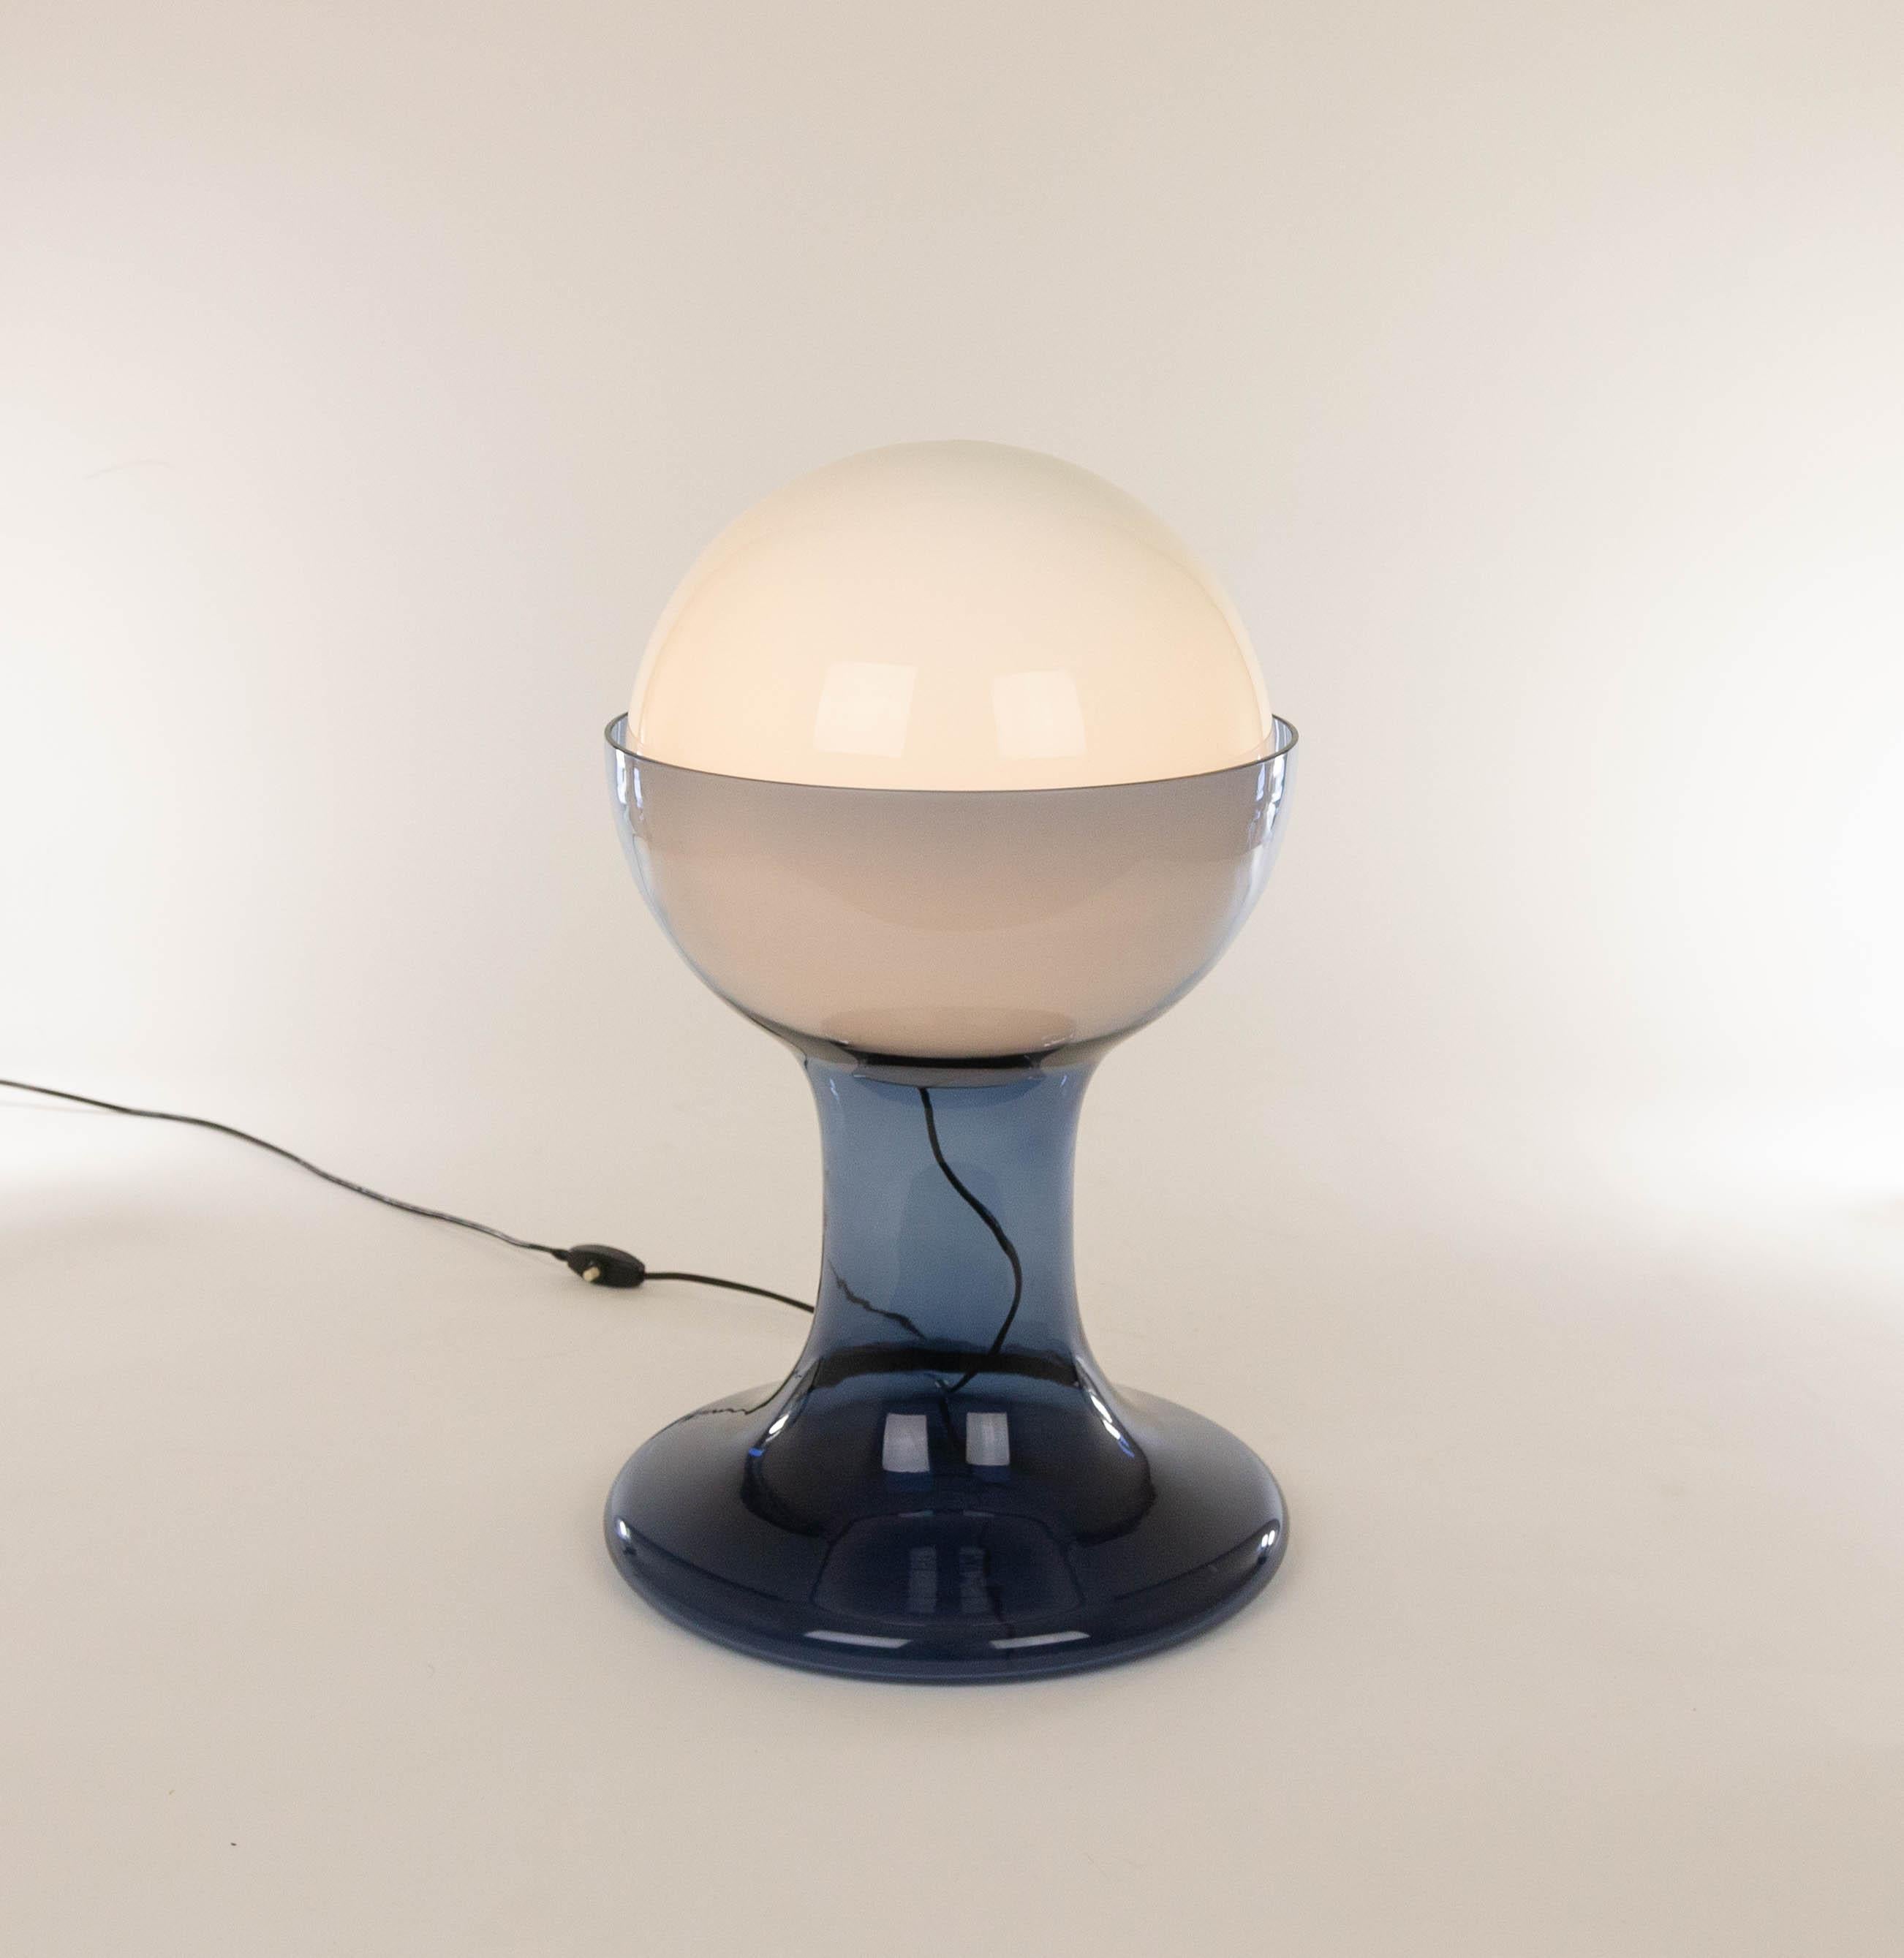 Large blue LT 216 table lamp designed by Carlo Nason and manufactured in the 1960s by Murano glassmaker A.V. Mazzega. The lamp is made of white opaline glass globe and a blue Murano glass base.

This model was produced in two sizes; LT 216 is the